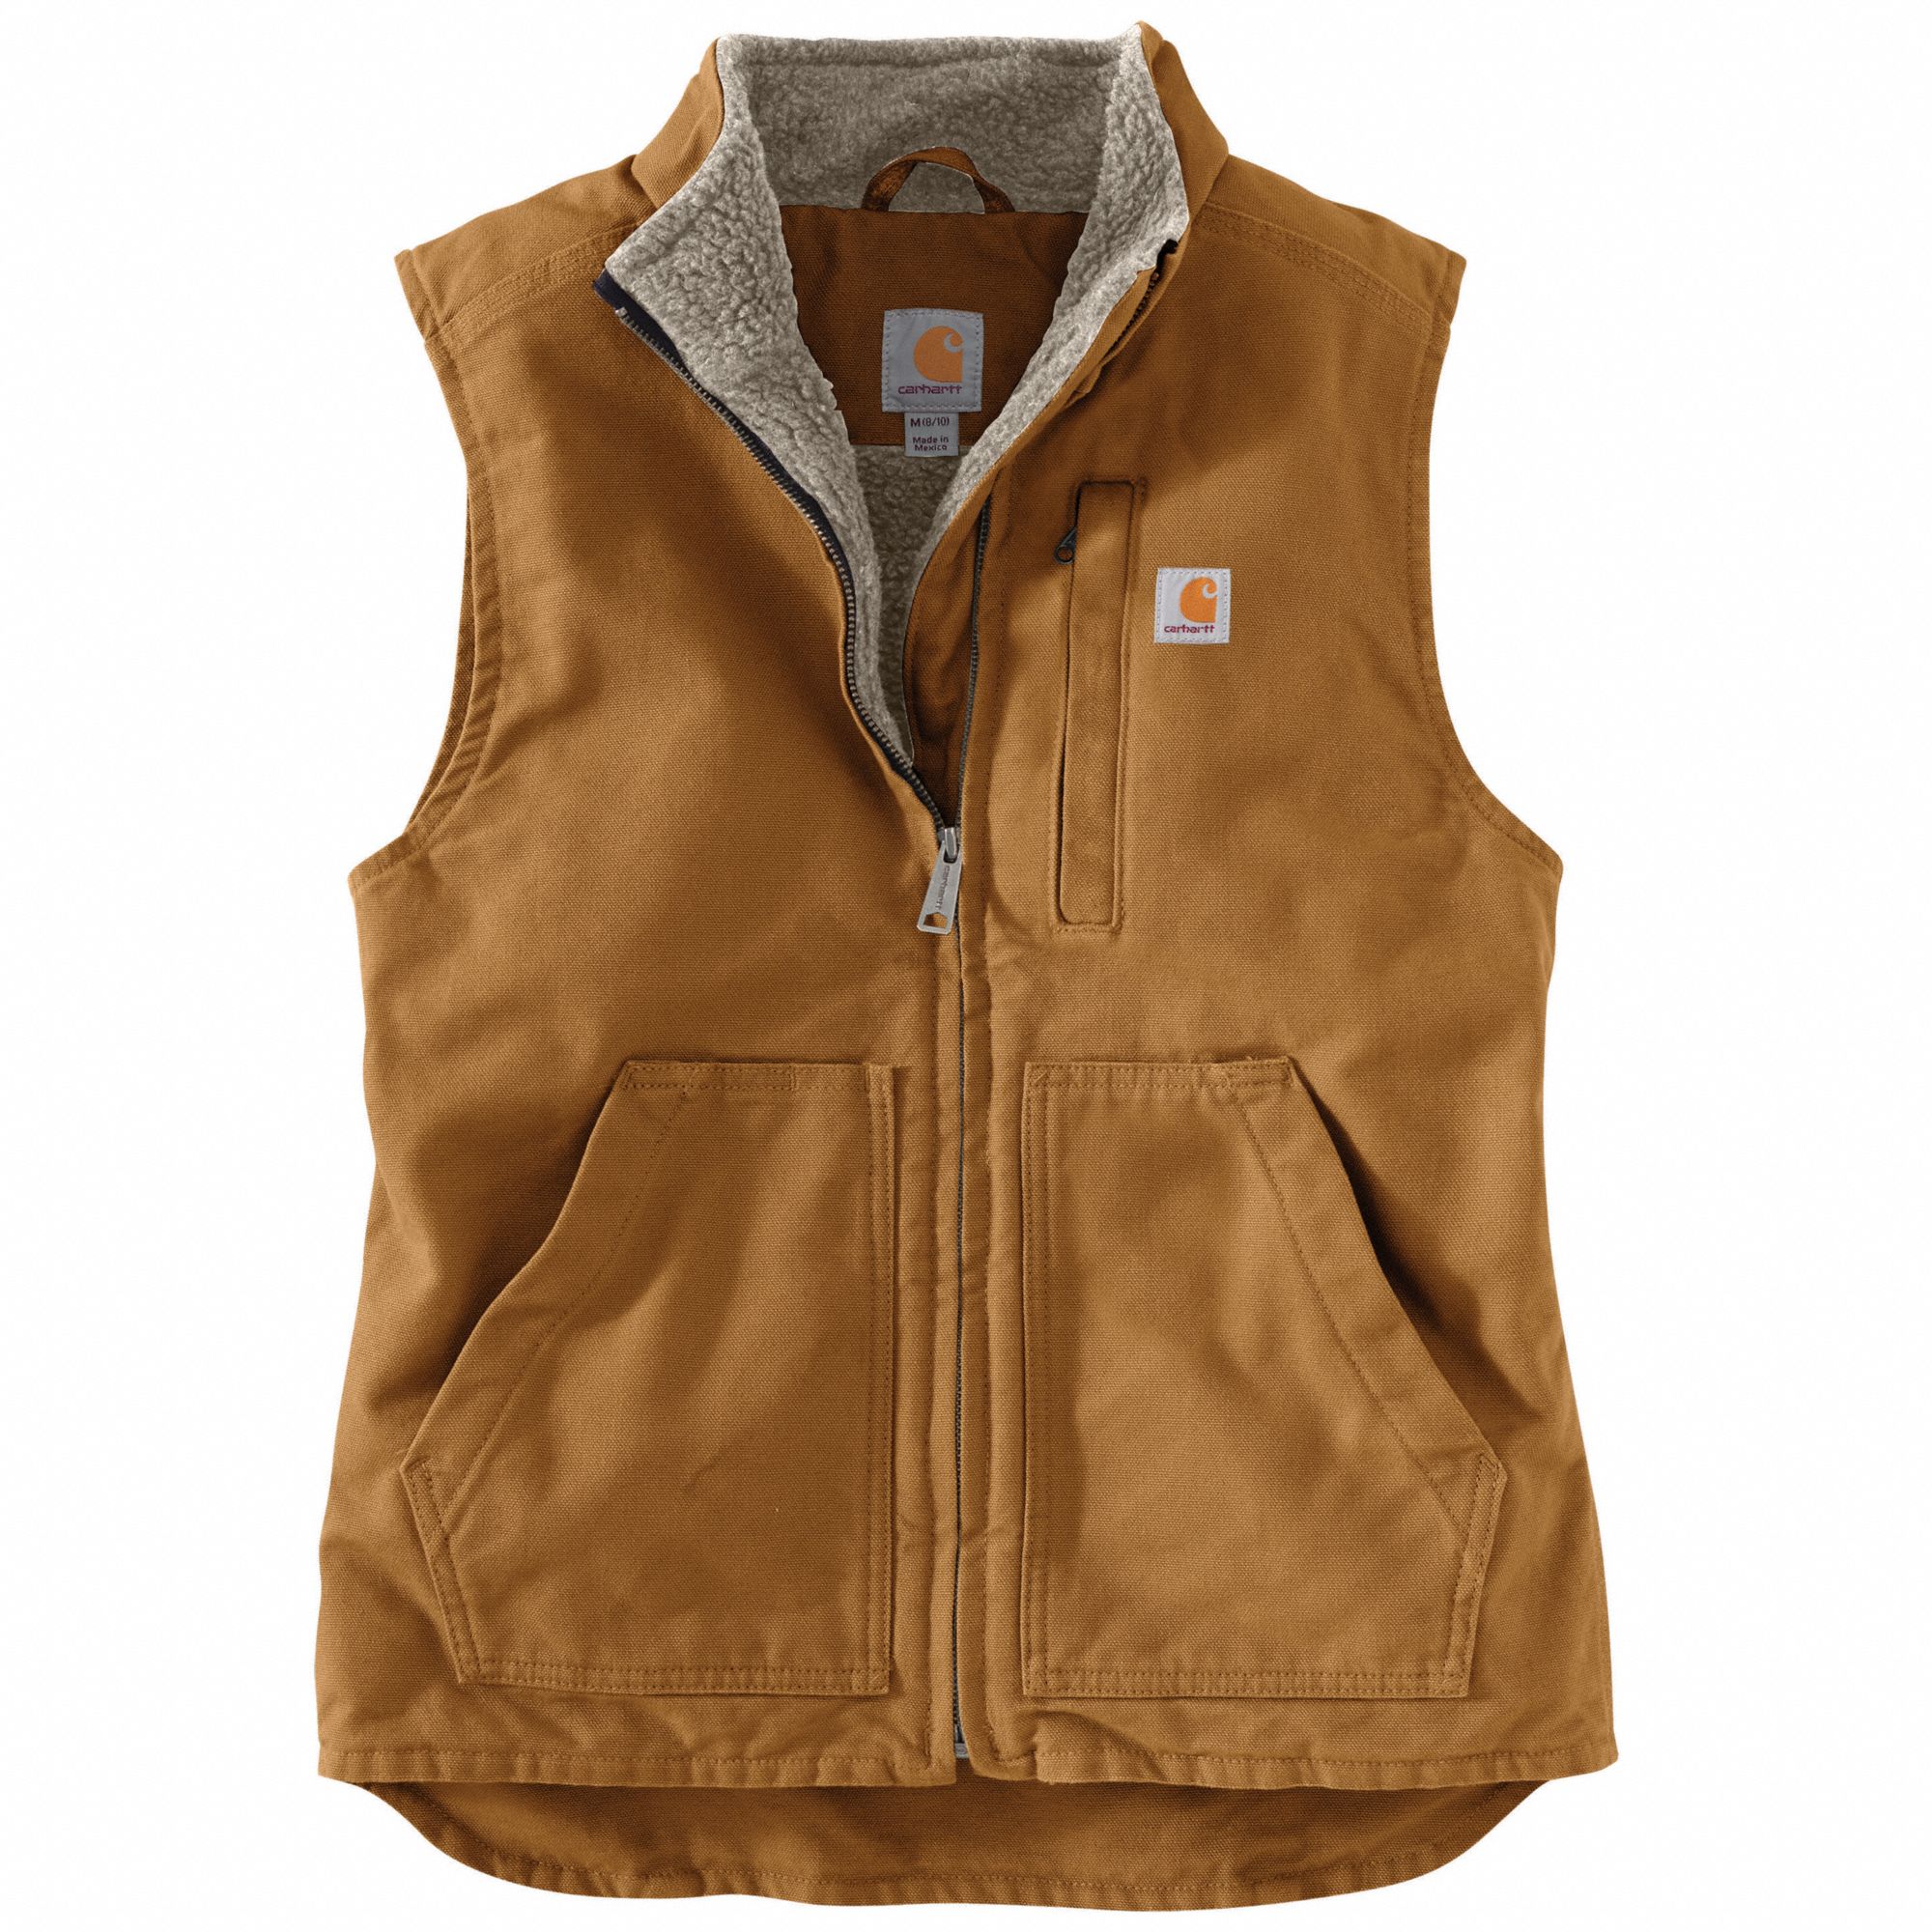 CARHARTT Insulated Vest: 2XL, 50 in Max Chest Size, 25 in Lg, Insulated for  Cold Conditions, Zipper